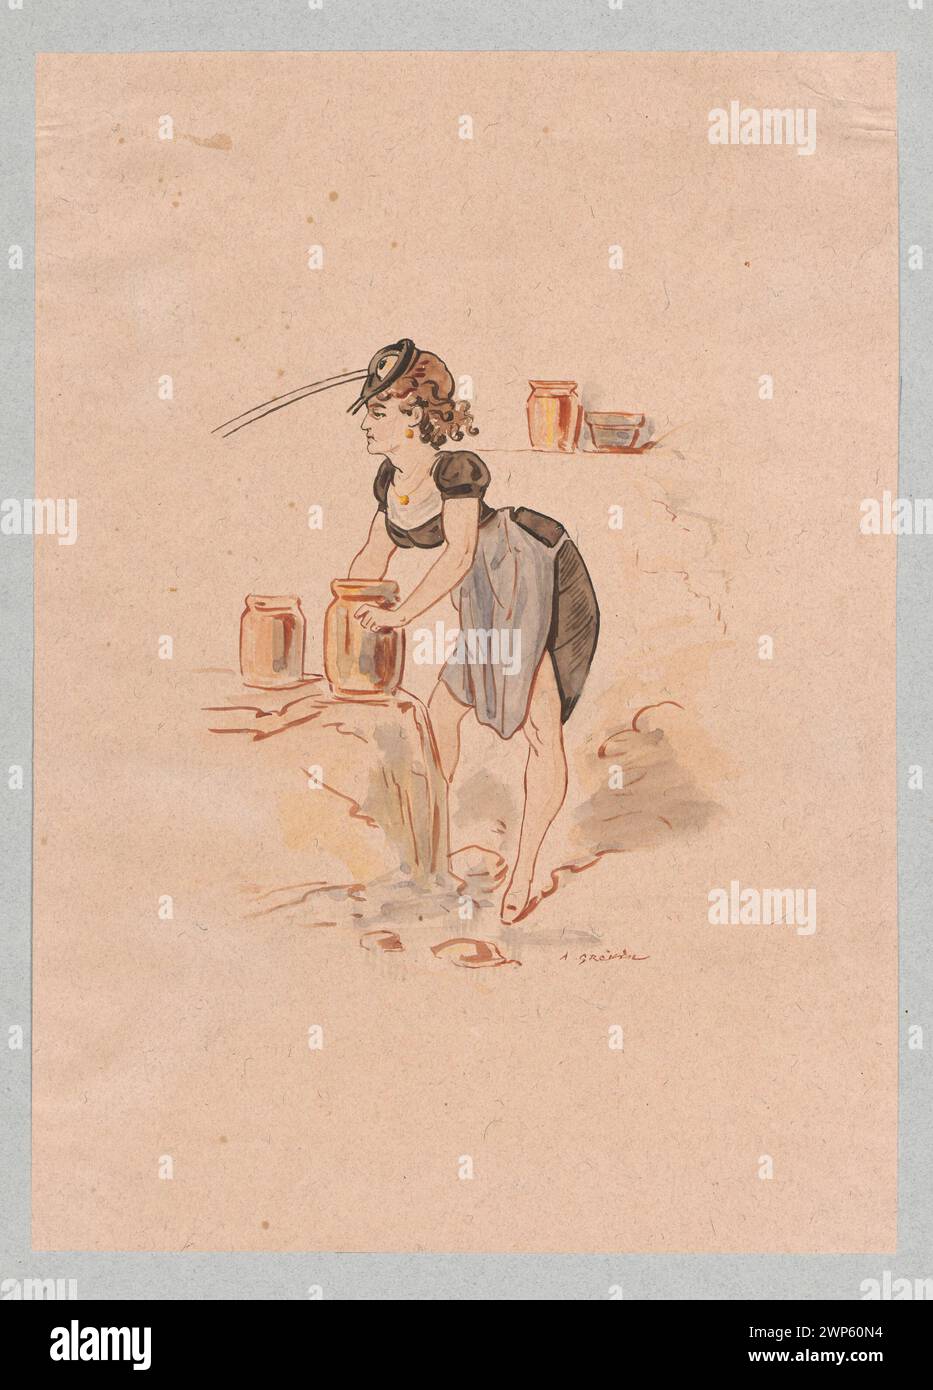 Ant; Grévin, Alfred (1827-1892); 2. after 19th century (1851-00-00-1900-00-00);Bloch, Jan Gottlib (1836-1902) - collections, fontaine Jean de la, Illustration, Fontaine, Jean de La (1621-1695), Society for the Encouragement of Fine Arts (Warsaw - 1860-1940) - collection, fairy tales, caricatures, ants, Mrówki, Insects, French drawings Stock Photo